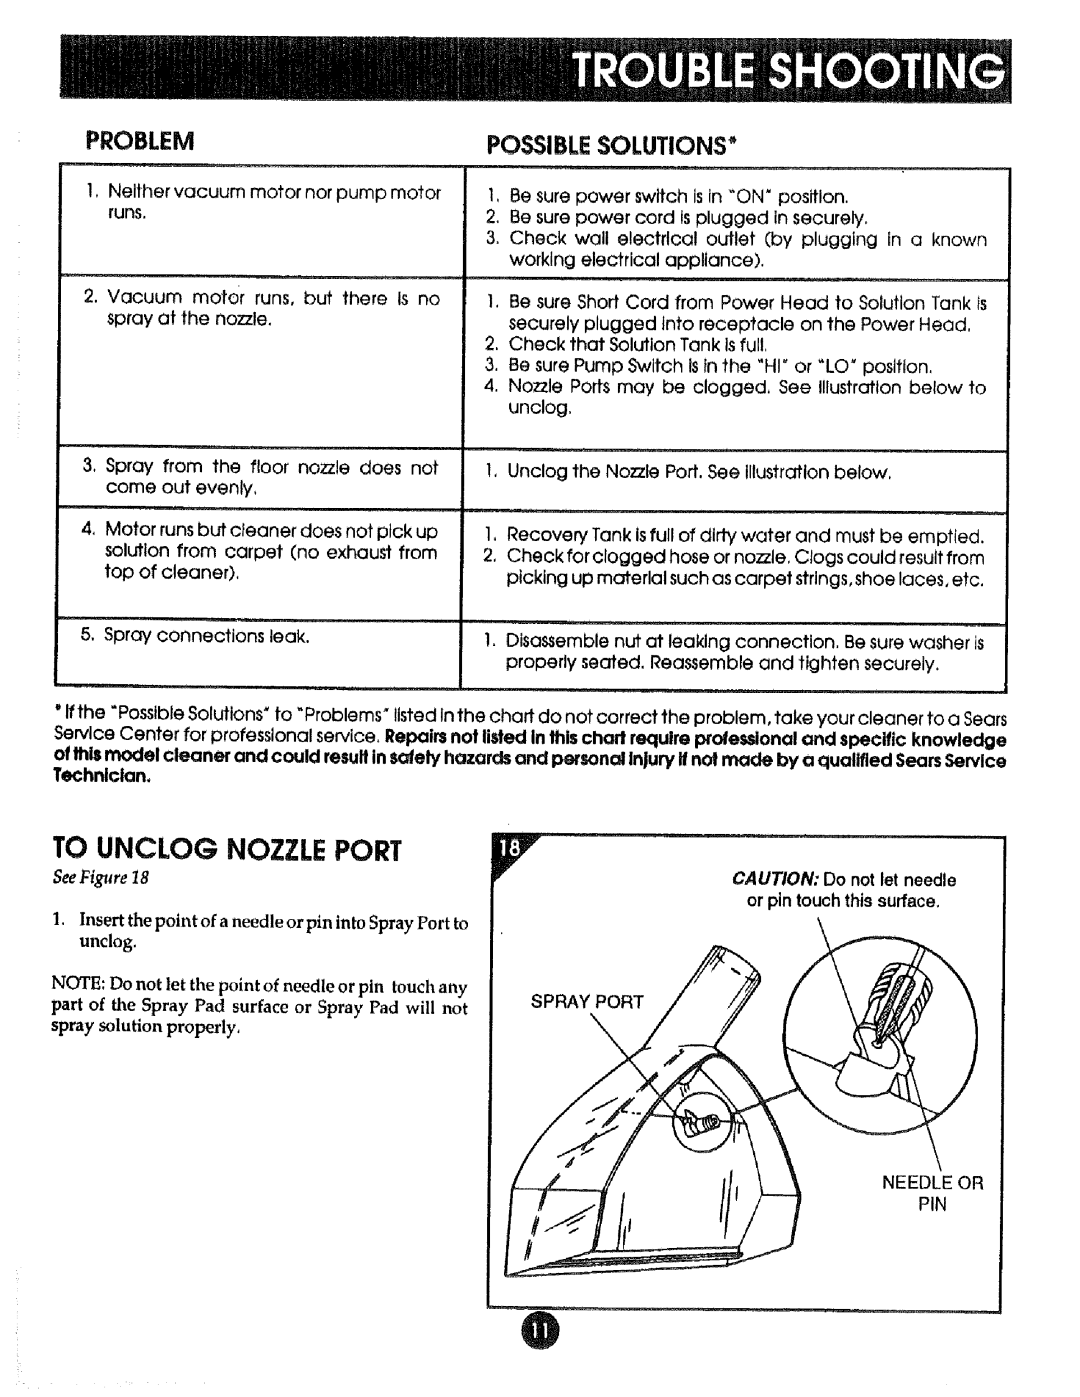 Sears 8690290, 175 manual To Unclog Nozzle Port, Problem, Possible Solutions, Technlclan, See Fisu re 